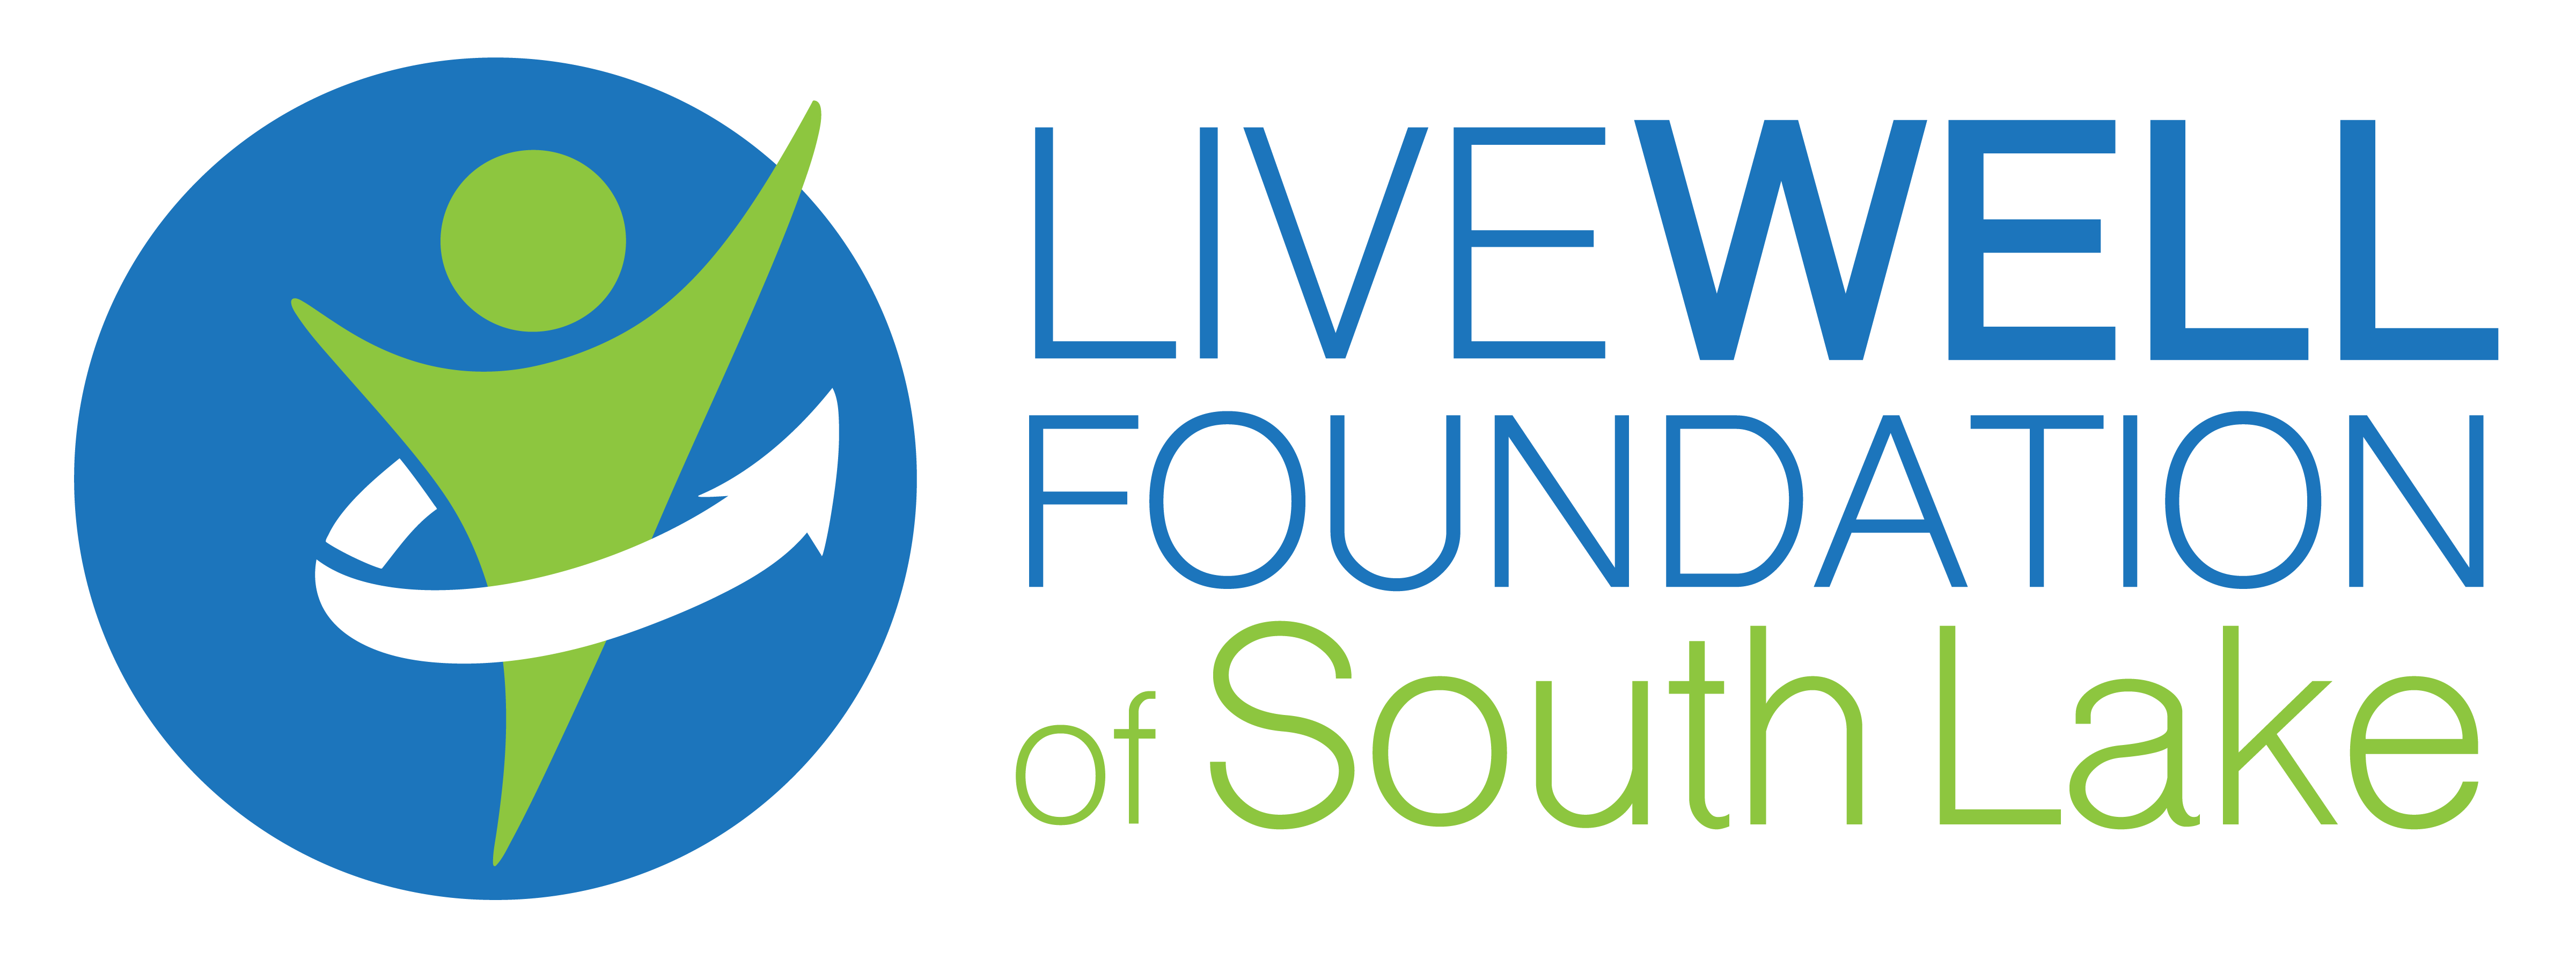 The Live Well Foundation of South Lake